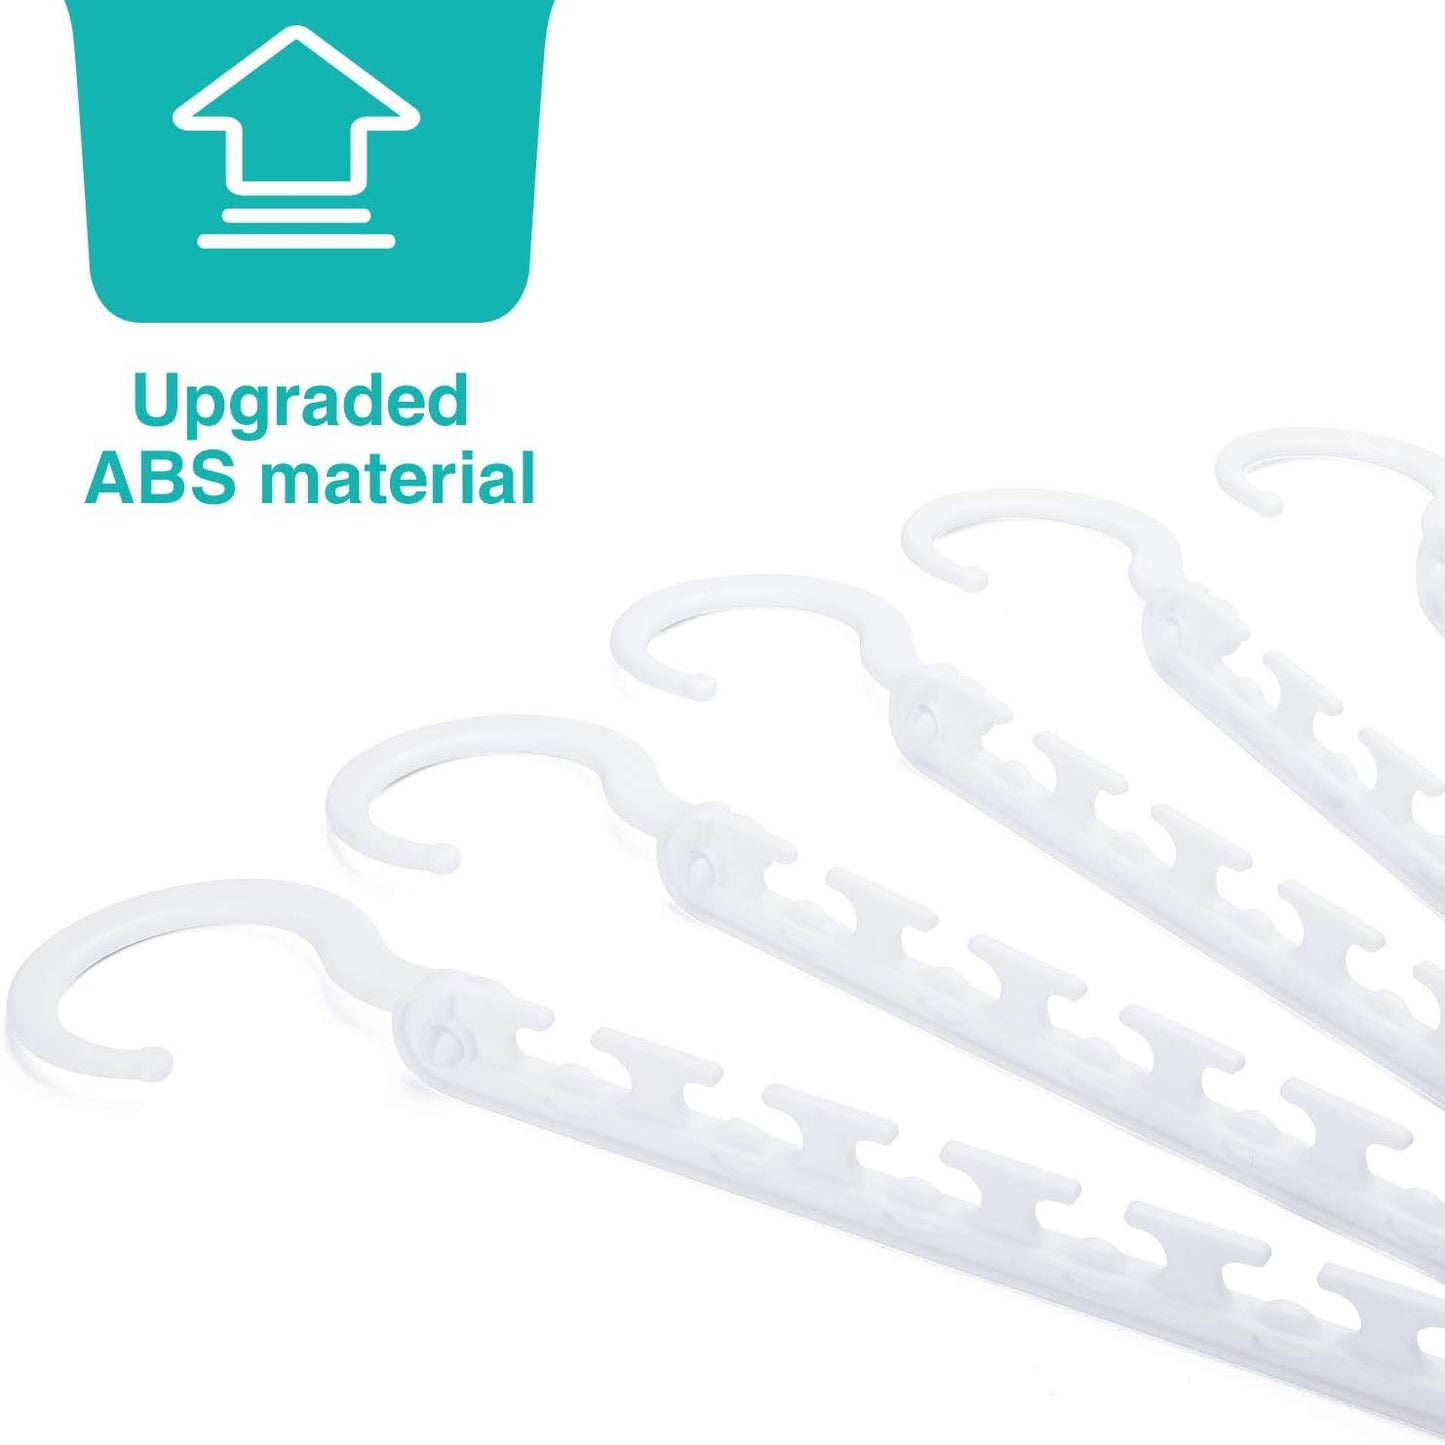 HOUSE DAY 10.6 Inch Sturdy Plastic Space Saving Hangers 20 Pack